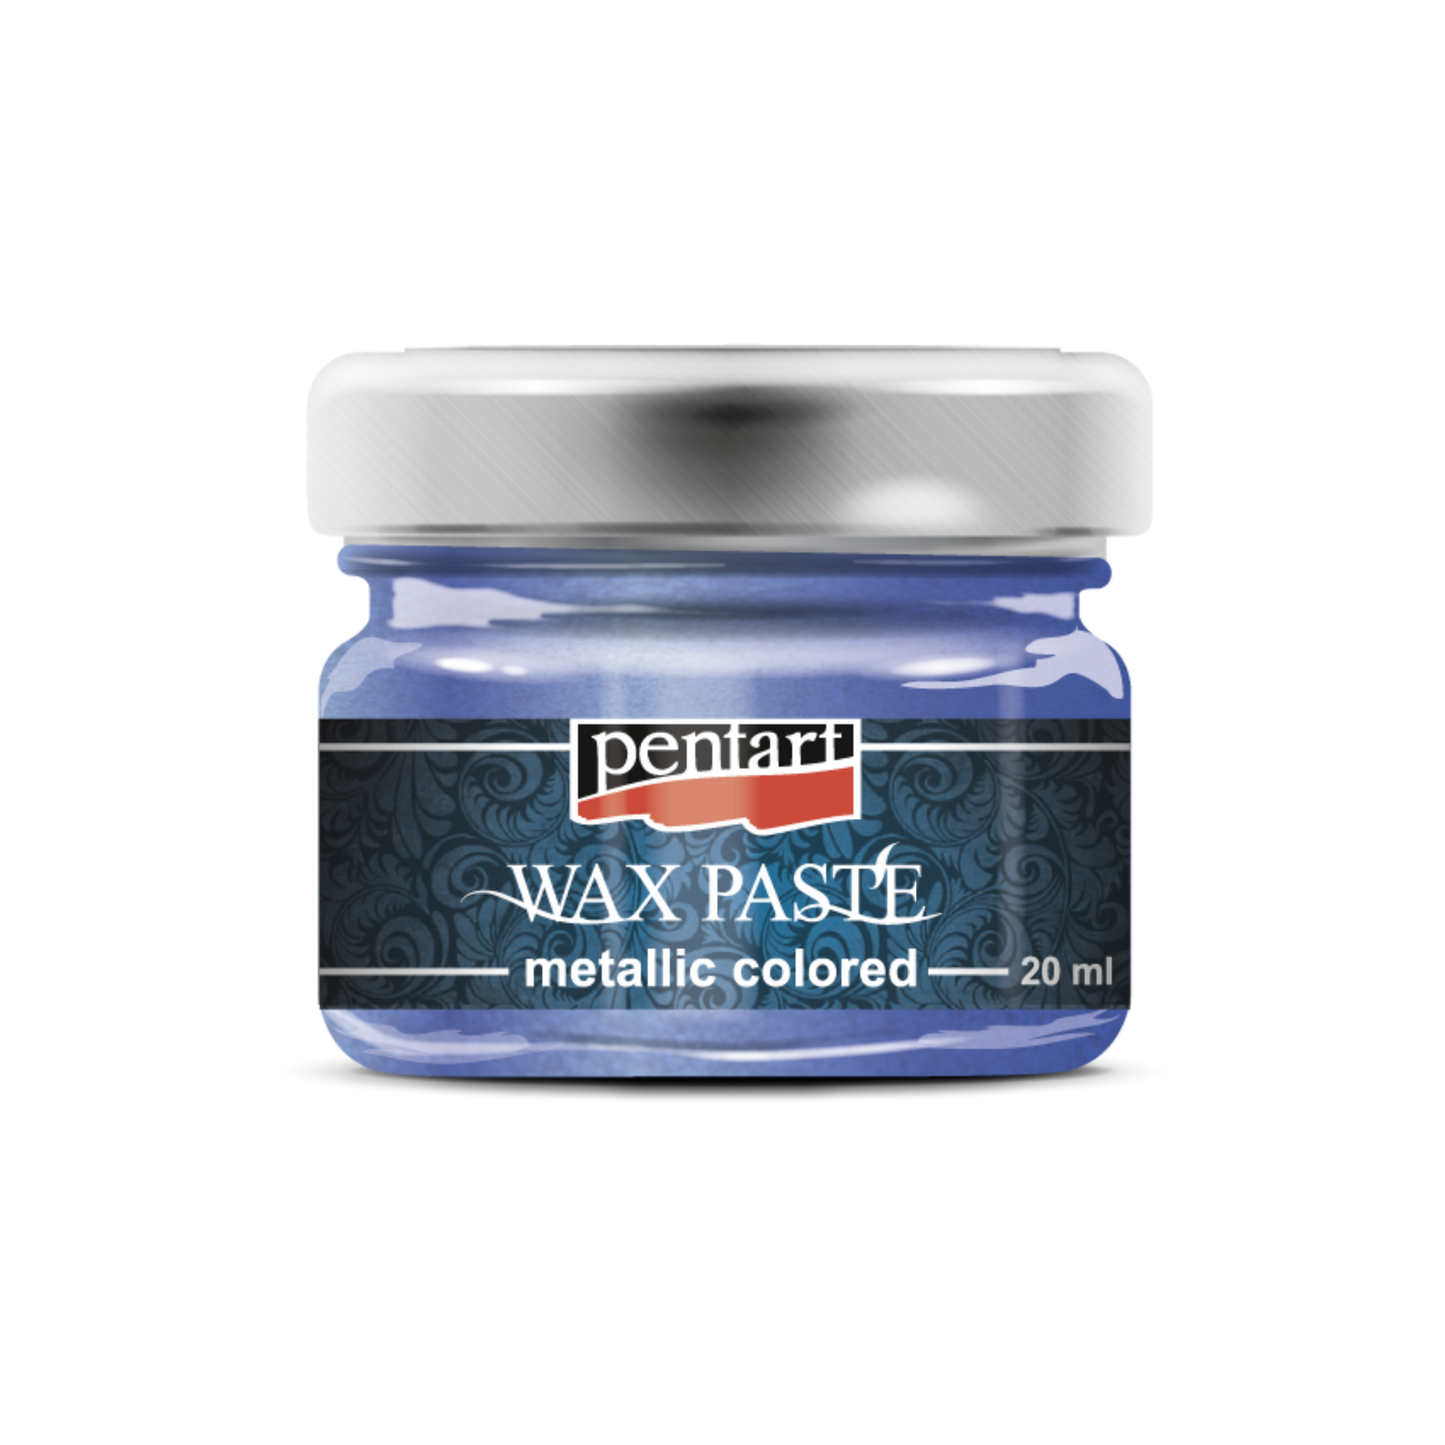 Wax Paste "Metallic Blue" by Pentart available at Milton's Daughter